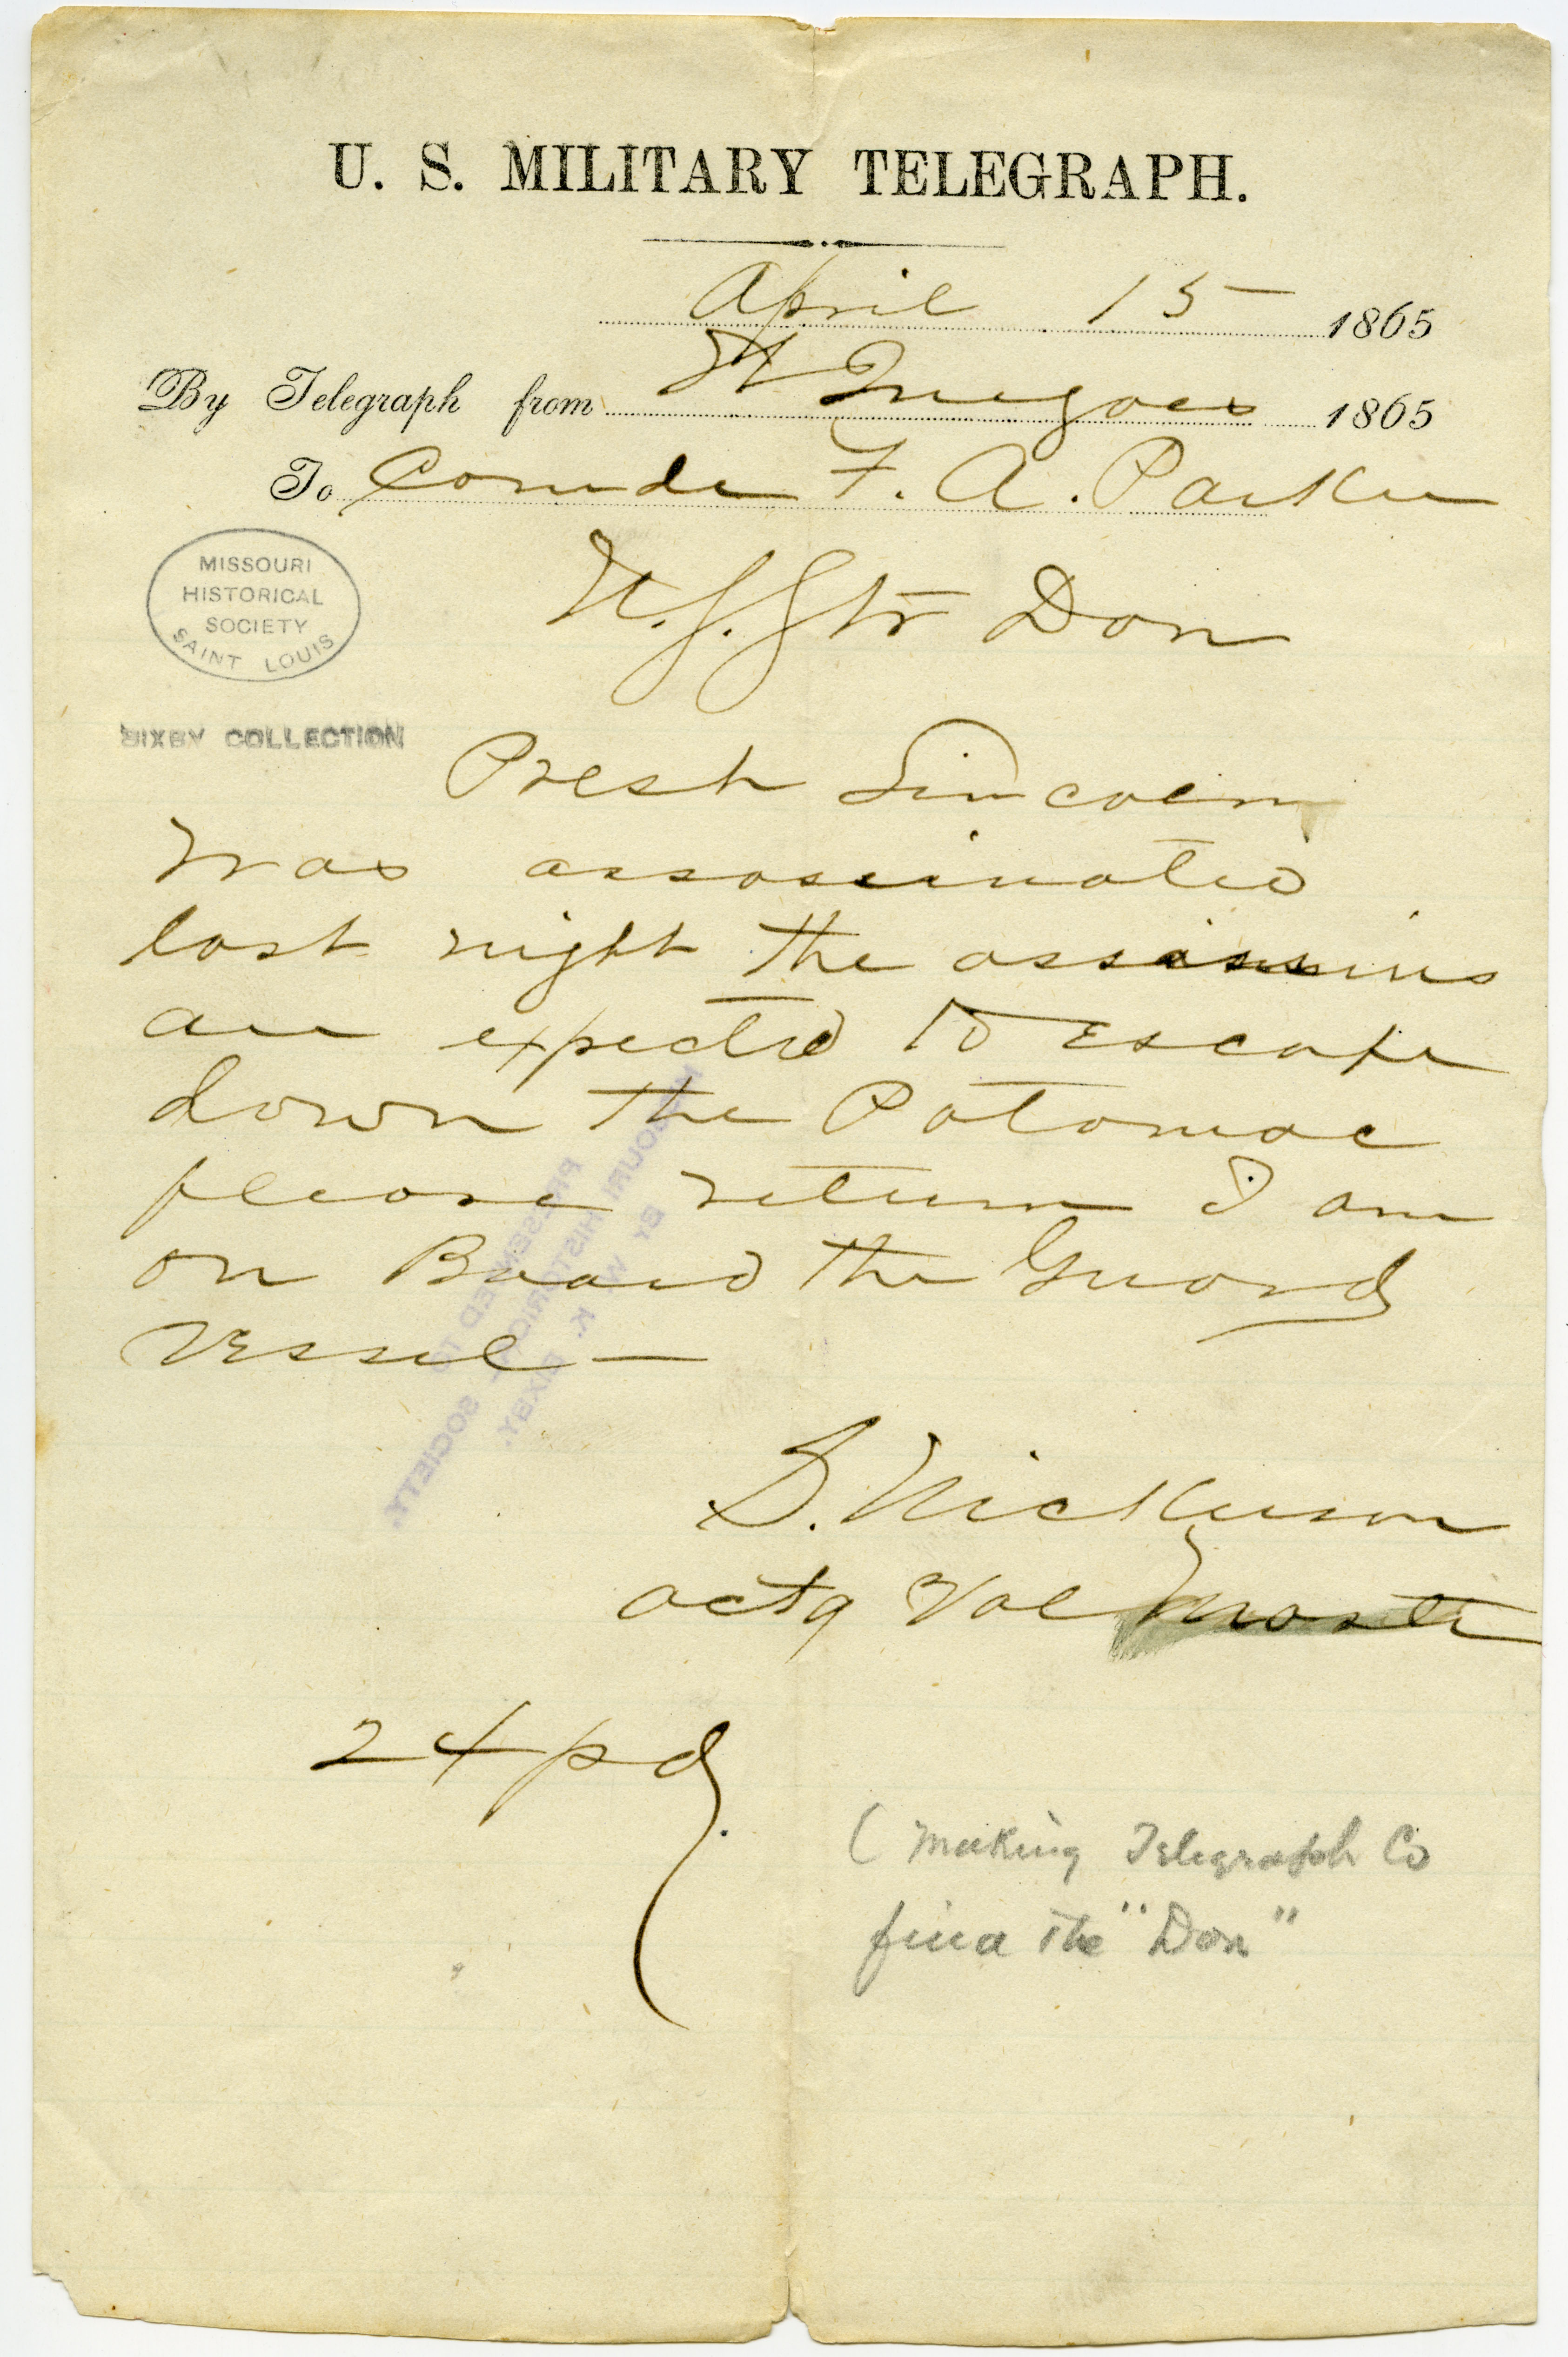 U. S. Military Telegraph of S. Nickerson, Actg. Vol. Master, to Comdr. F. A. Parker, April 15, 1865